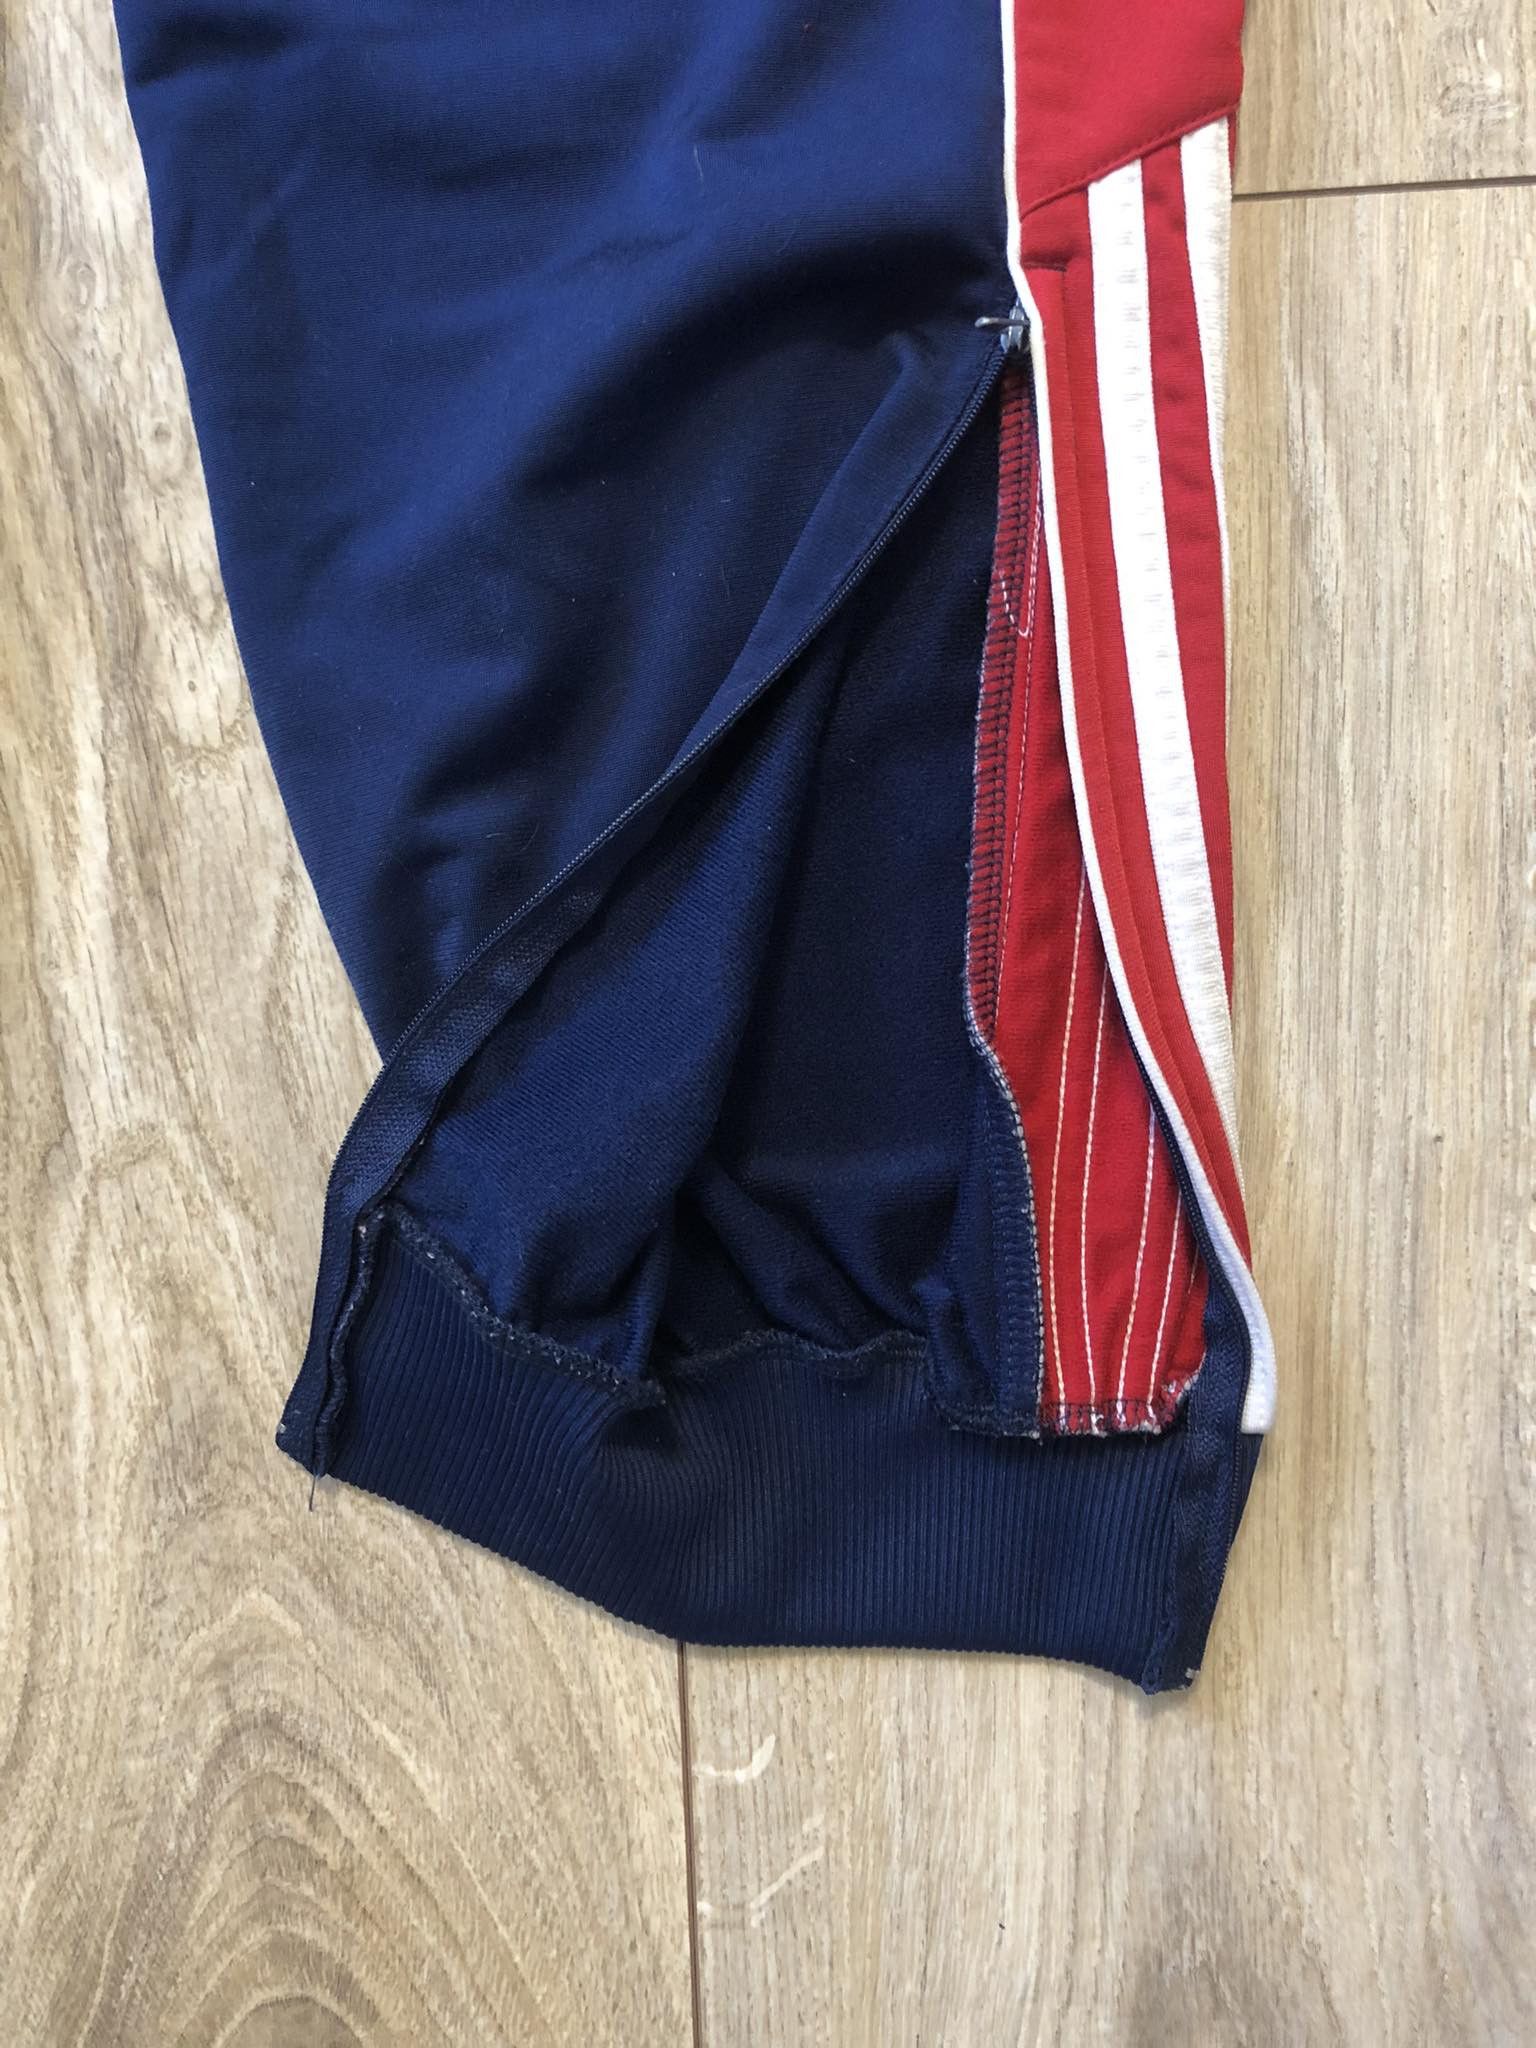 Adidas Adidas Olympia Toppen sweatpants vintage size M? 70s 80s Size US 32 / EU 48 - 8 Preview